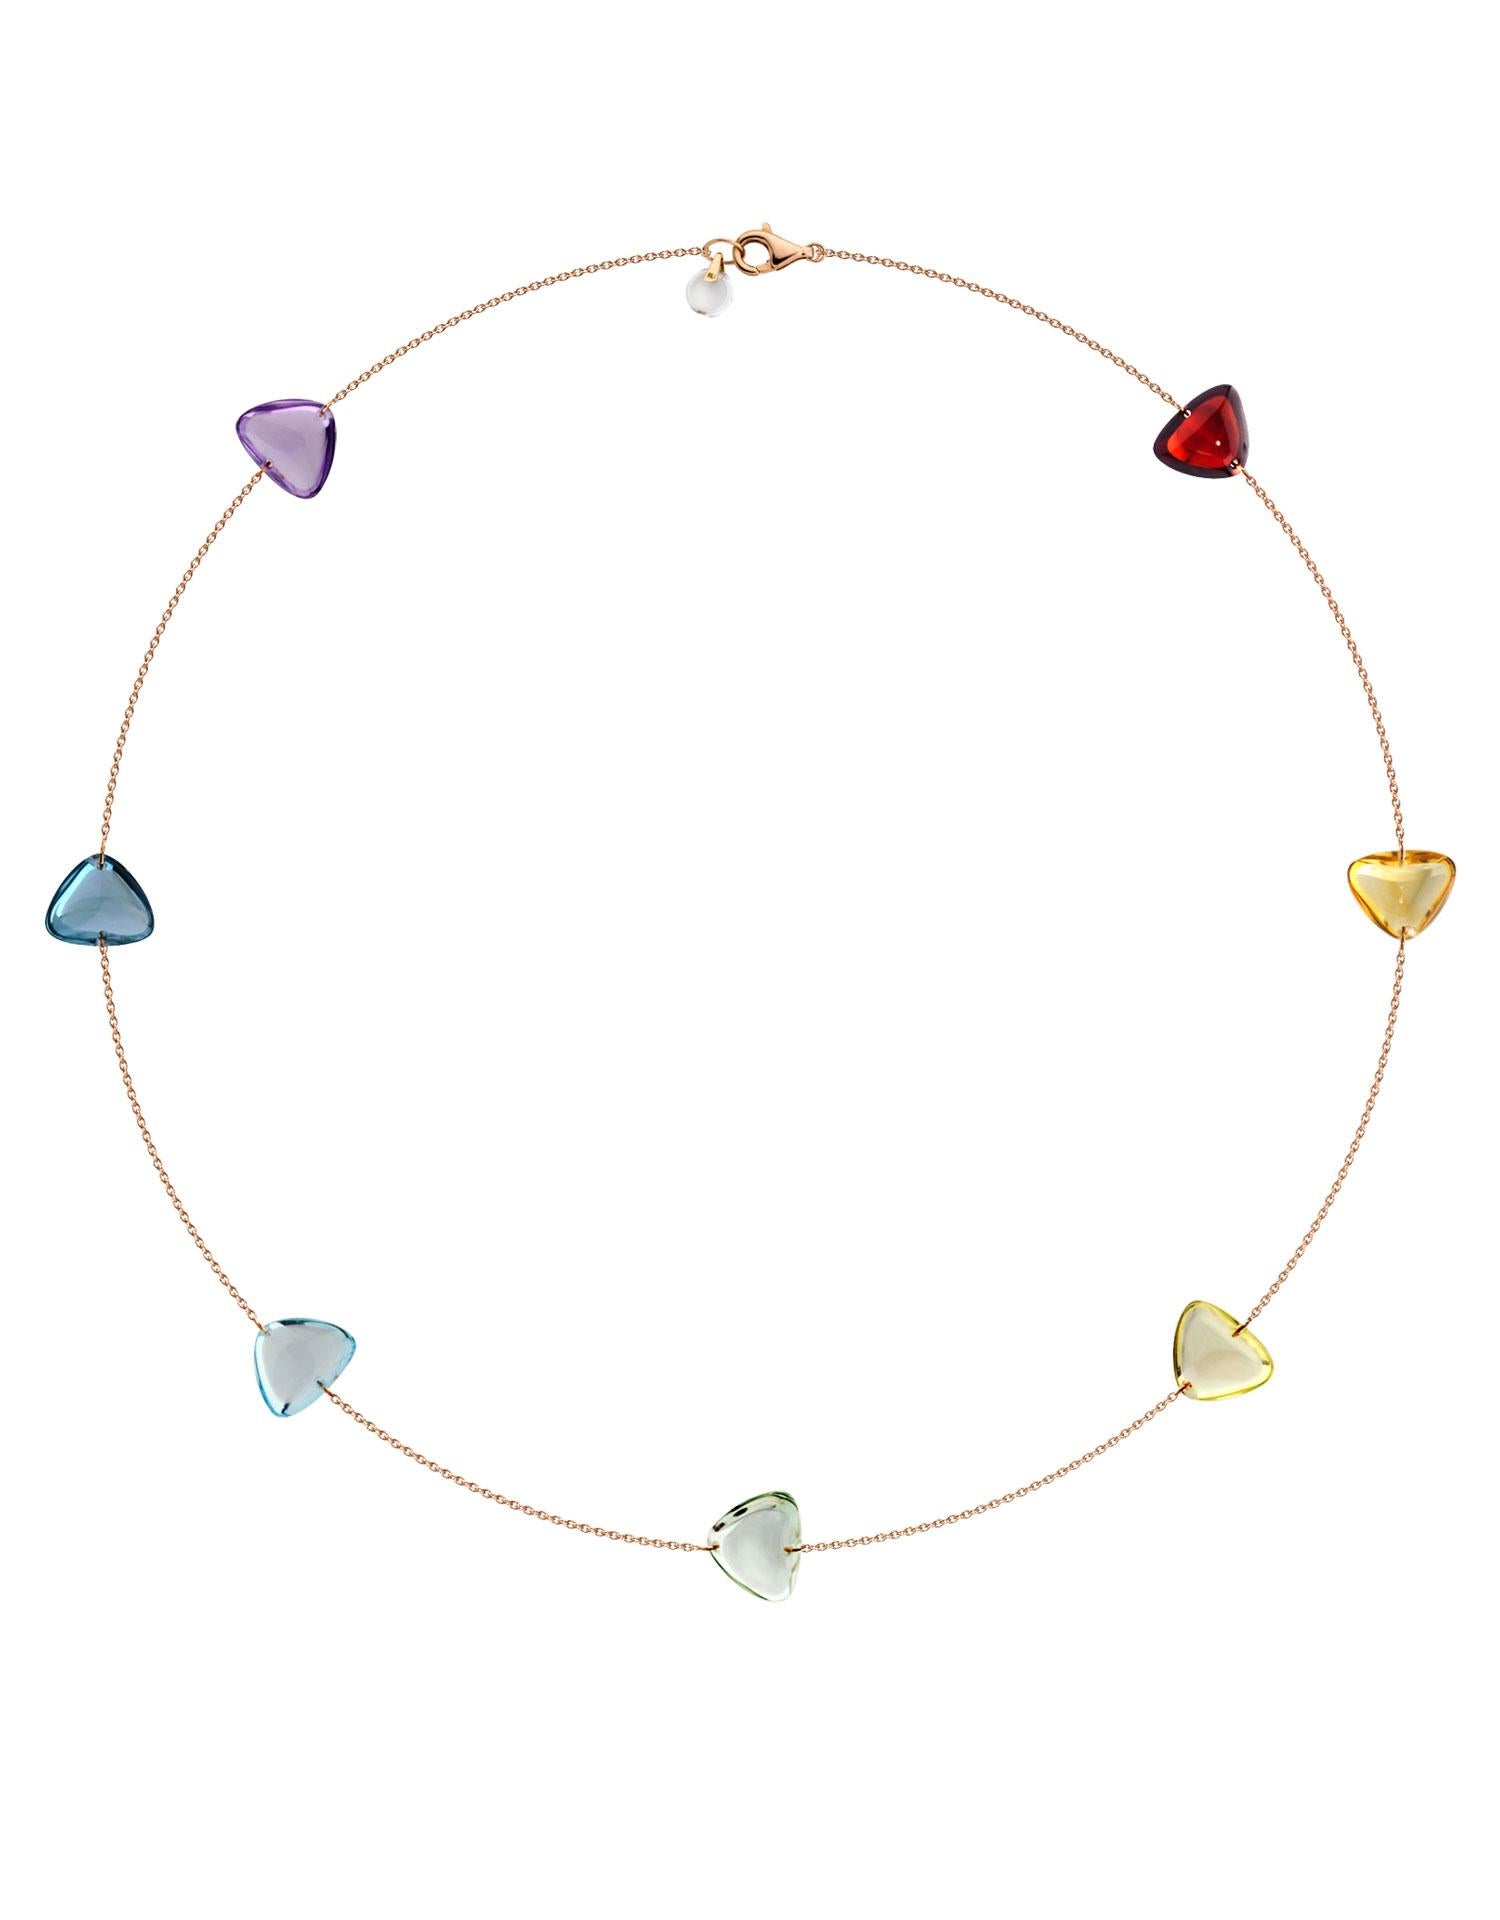 Rebecca Li designs mindfulness. 
This elegant crystal and gold chain is from her signature Crystal Link Collection.

Natural crystal rainbow triangle signifies balanced mind body and spirit.

Chain Metal Type: 18K Rose Gold
Chain Length: 17.5